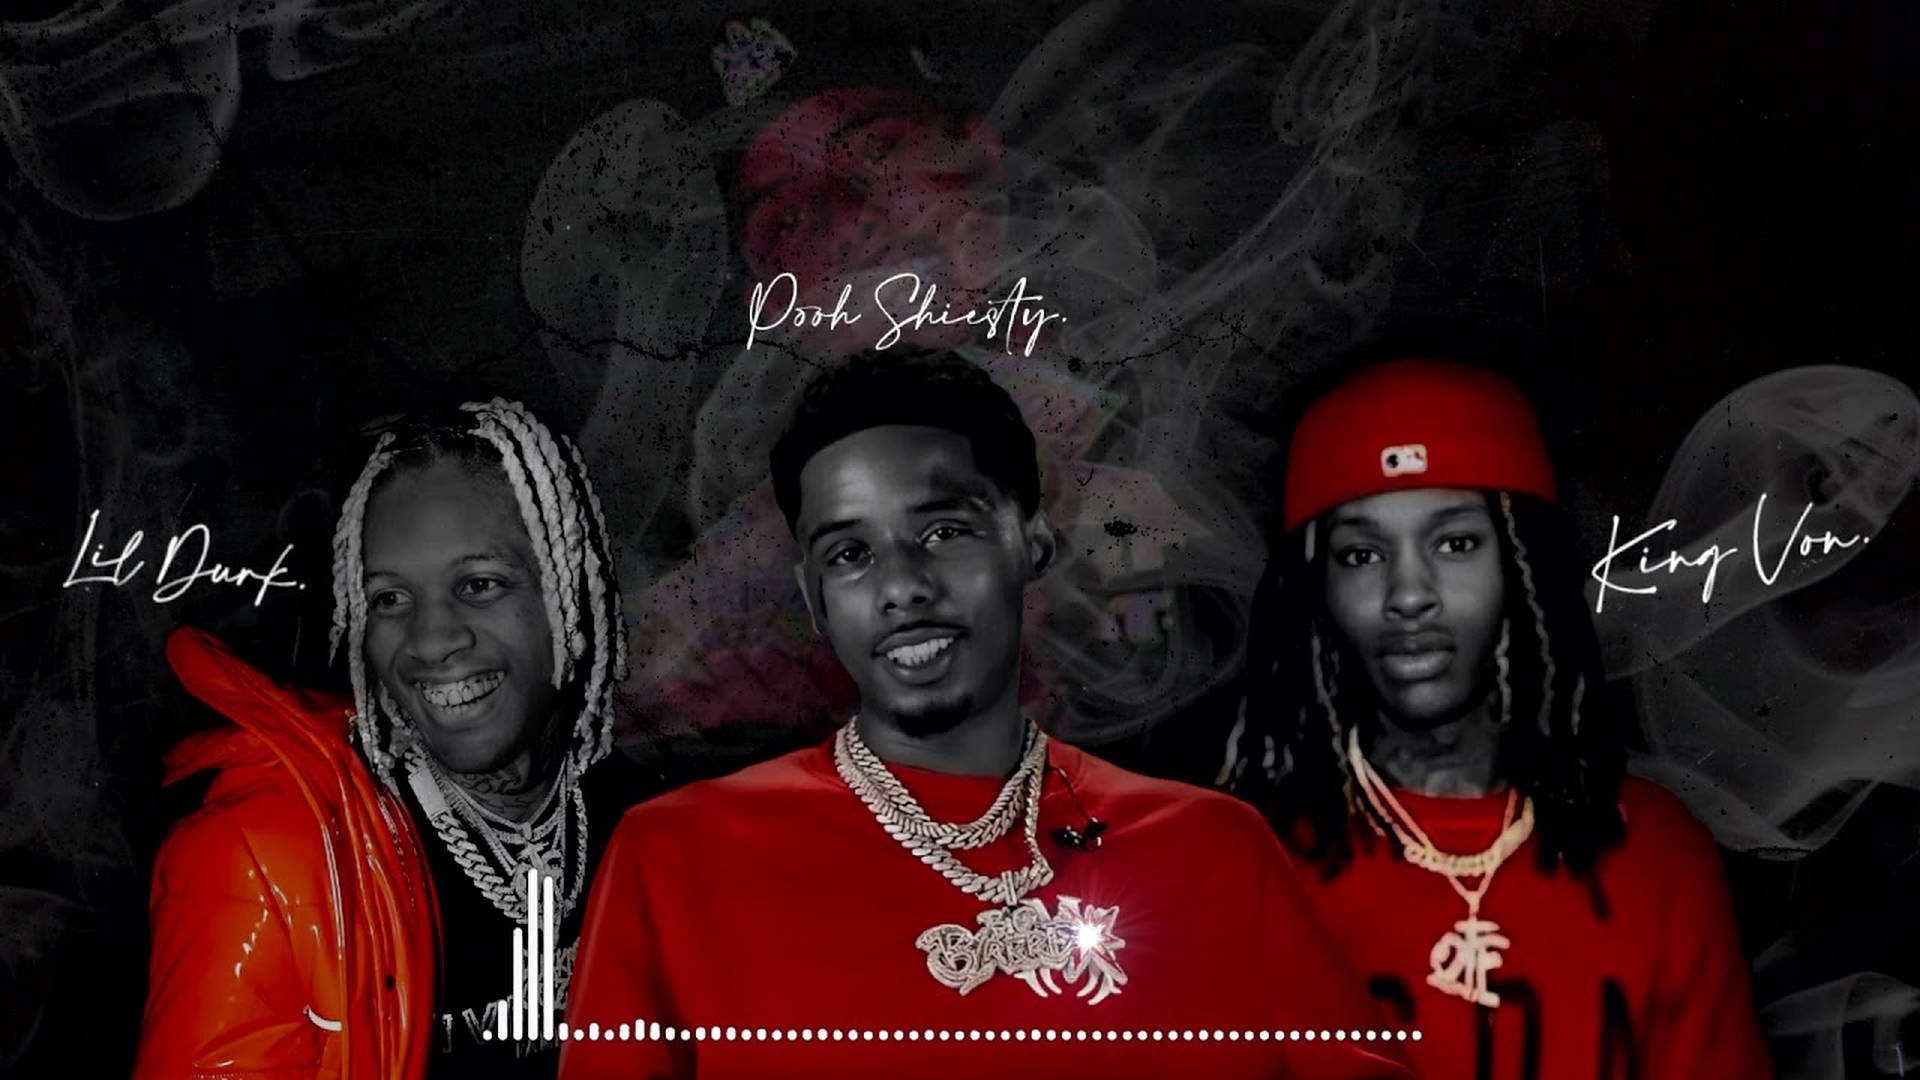 King Von Wallpaper Discover more cool, iphone, lil durk, posters